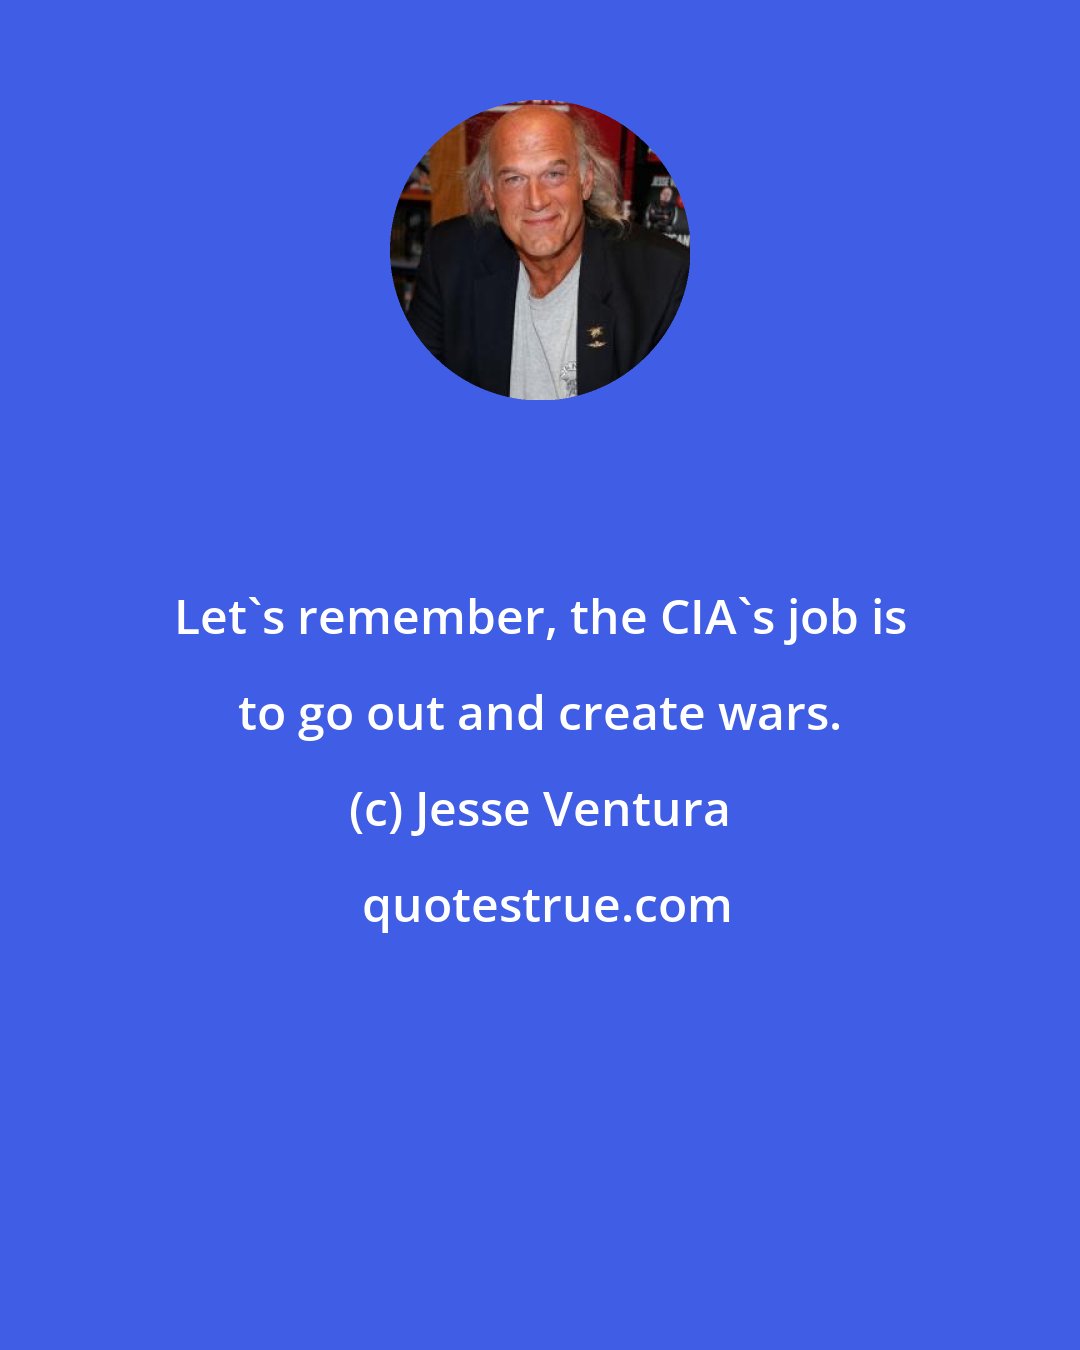 Jesse Ventura: Let's remember, the CIA's job is to go out and create wars.